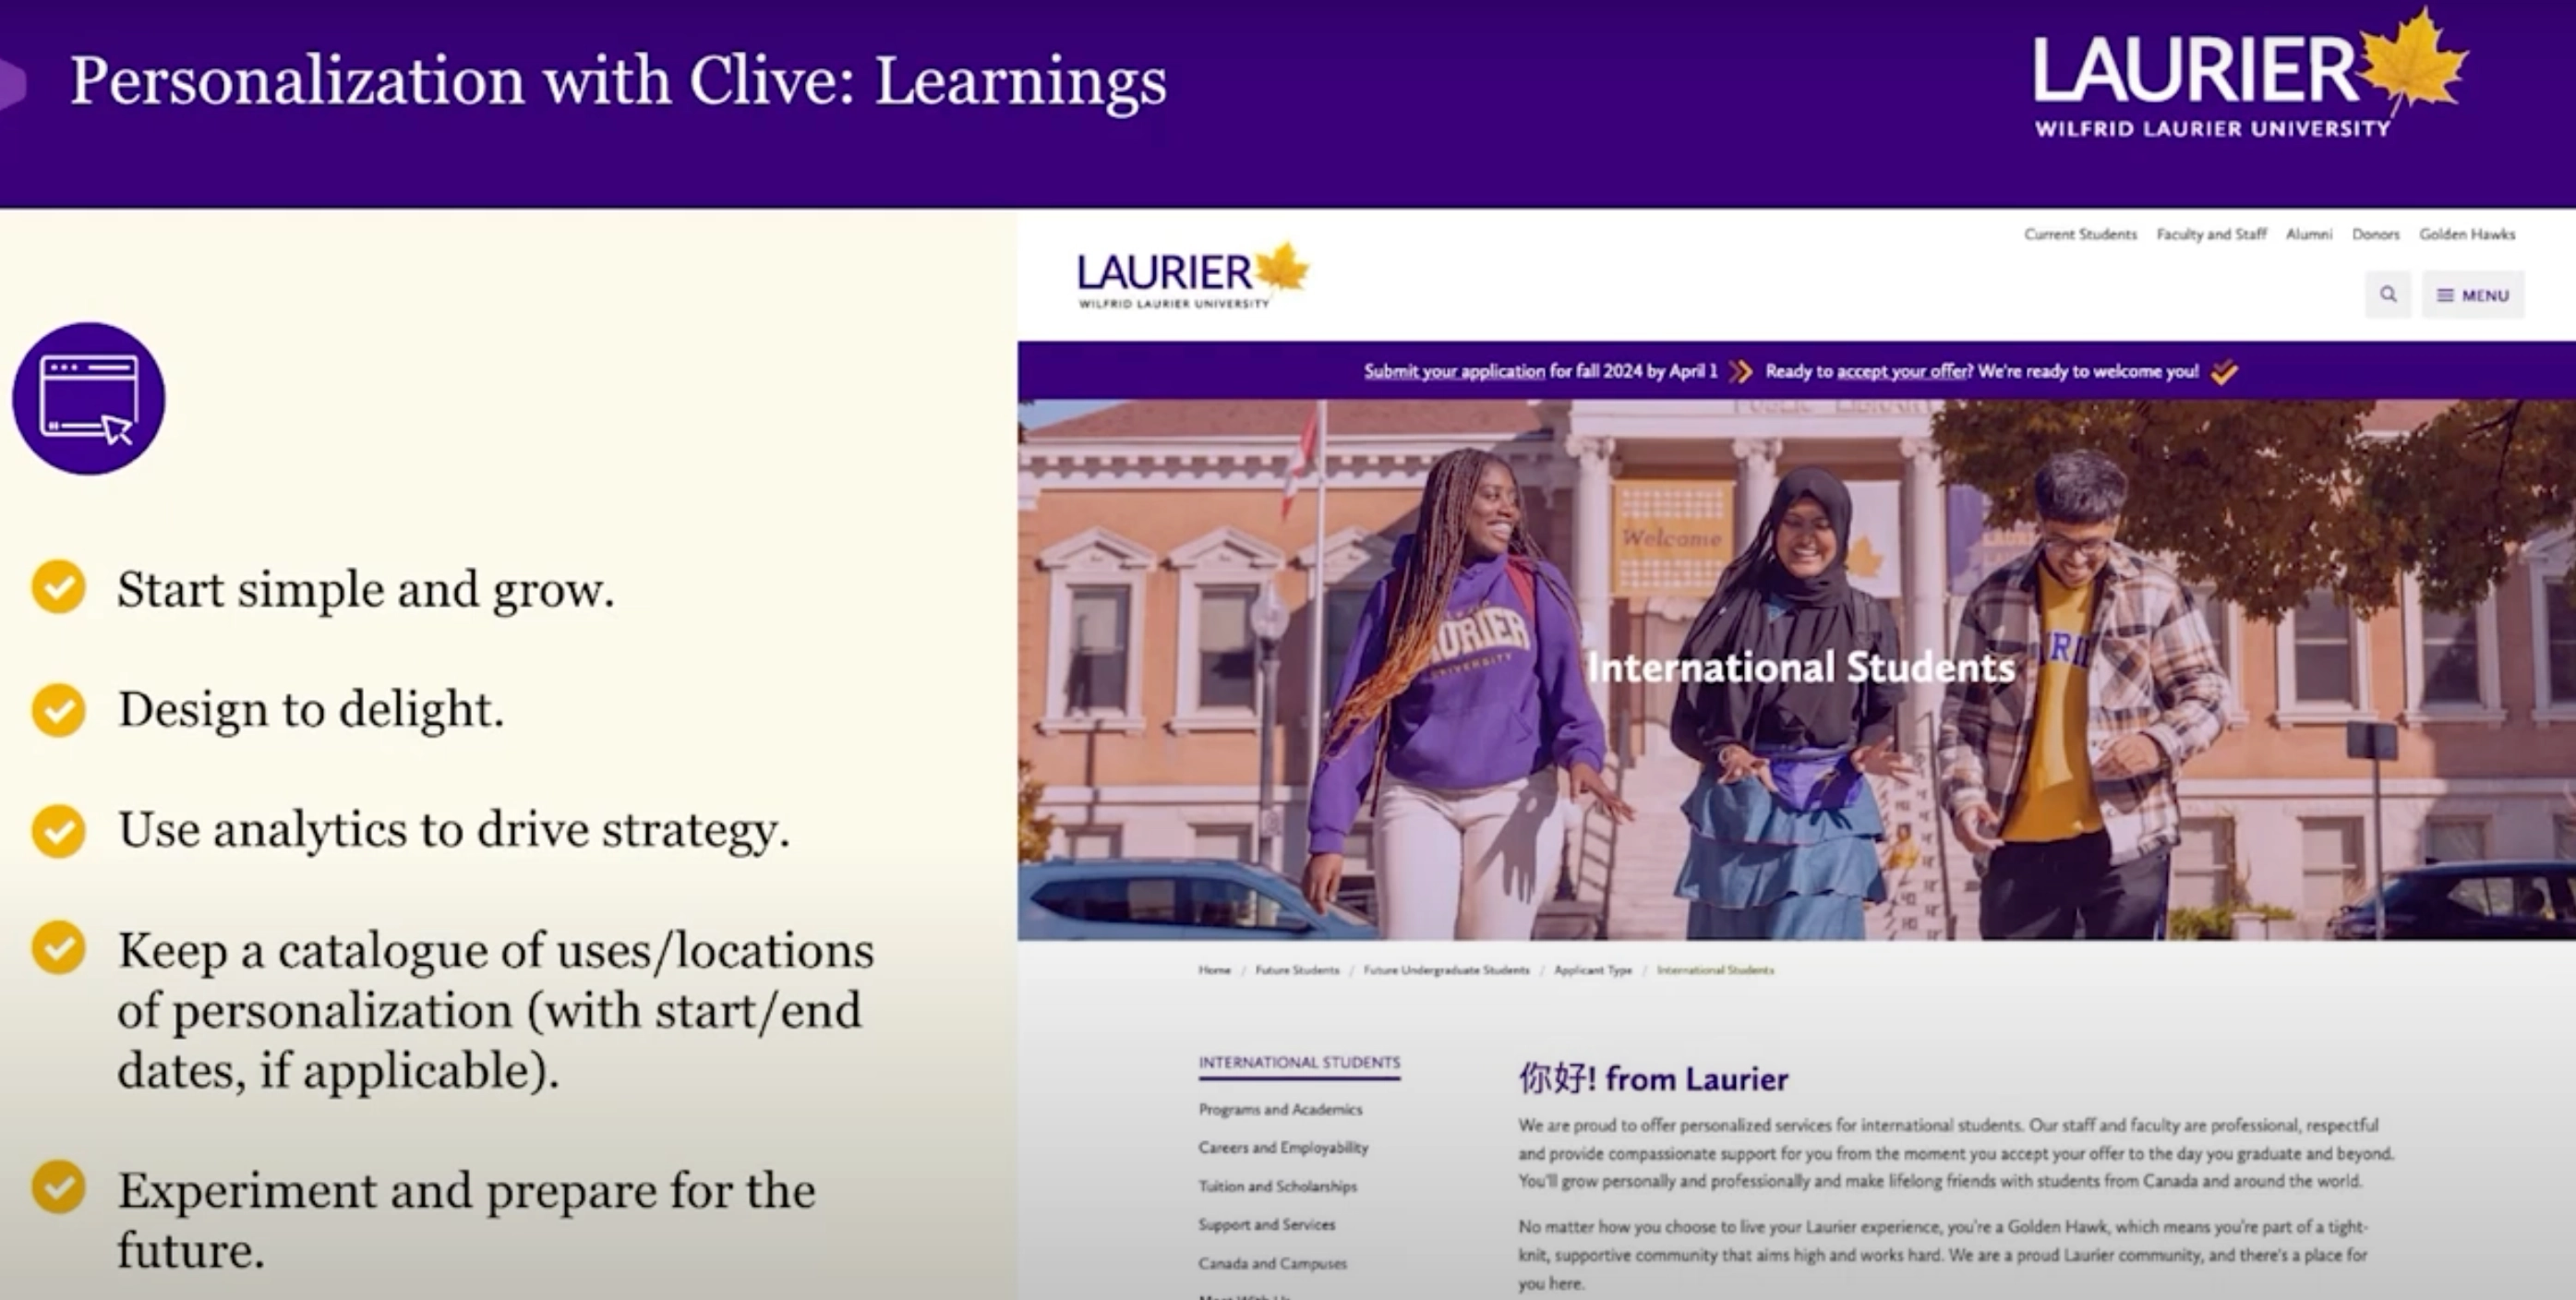 A slide with key takeaways on using personalization at Wilfrid Laurier University, featuring happy students on campus.